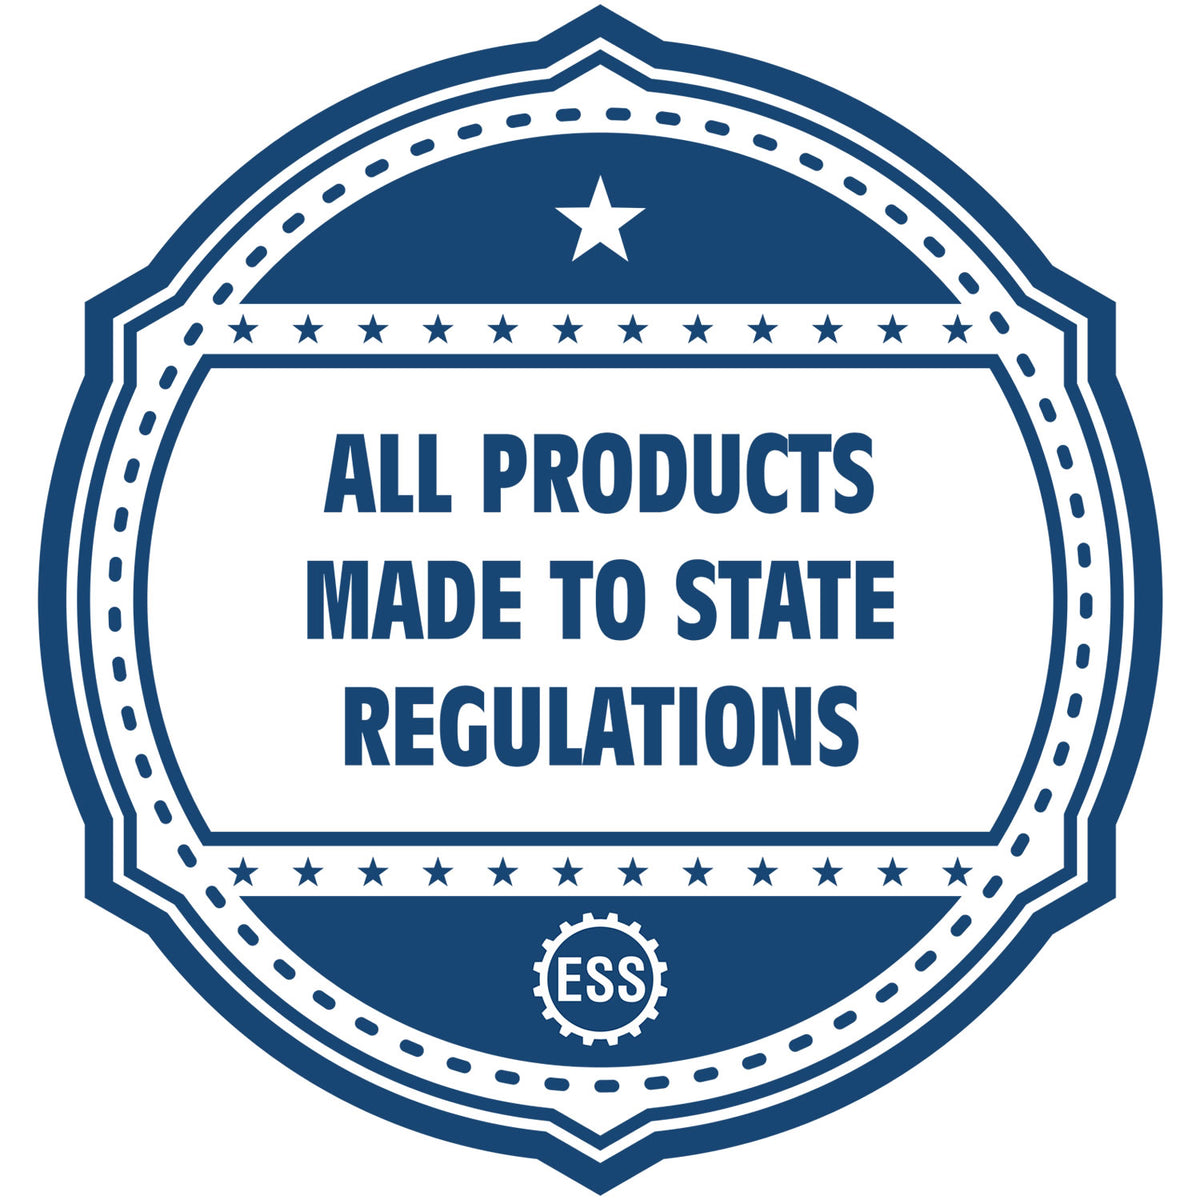 An icon or badge element for the Self-Inking New Jersey Landscape Architect Stamp showing that this product is made in compliance with state regulations.